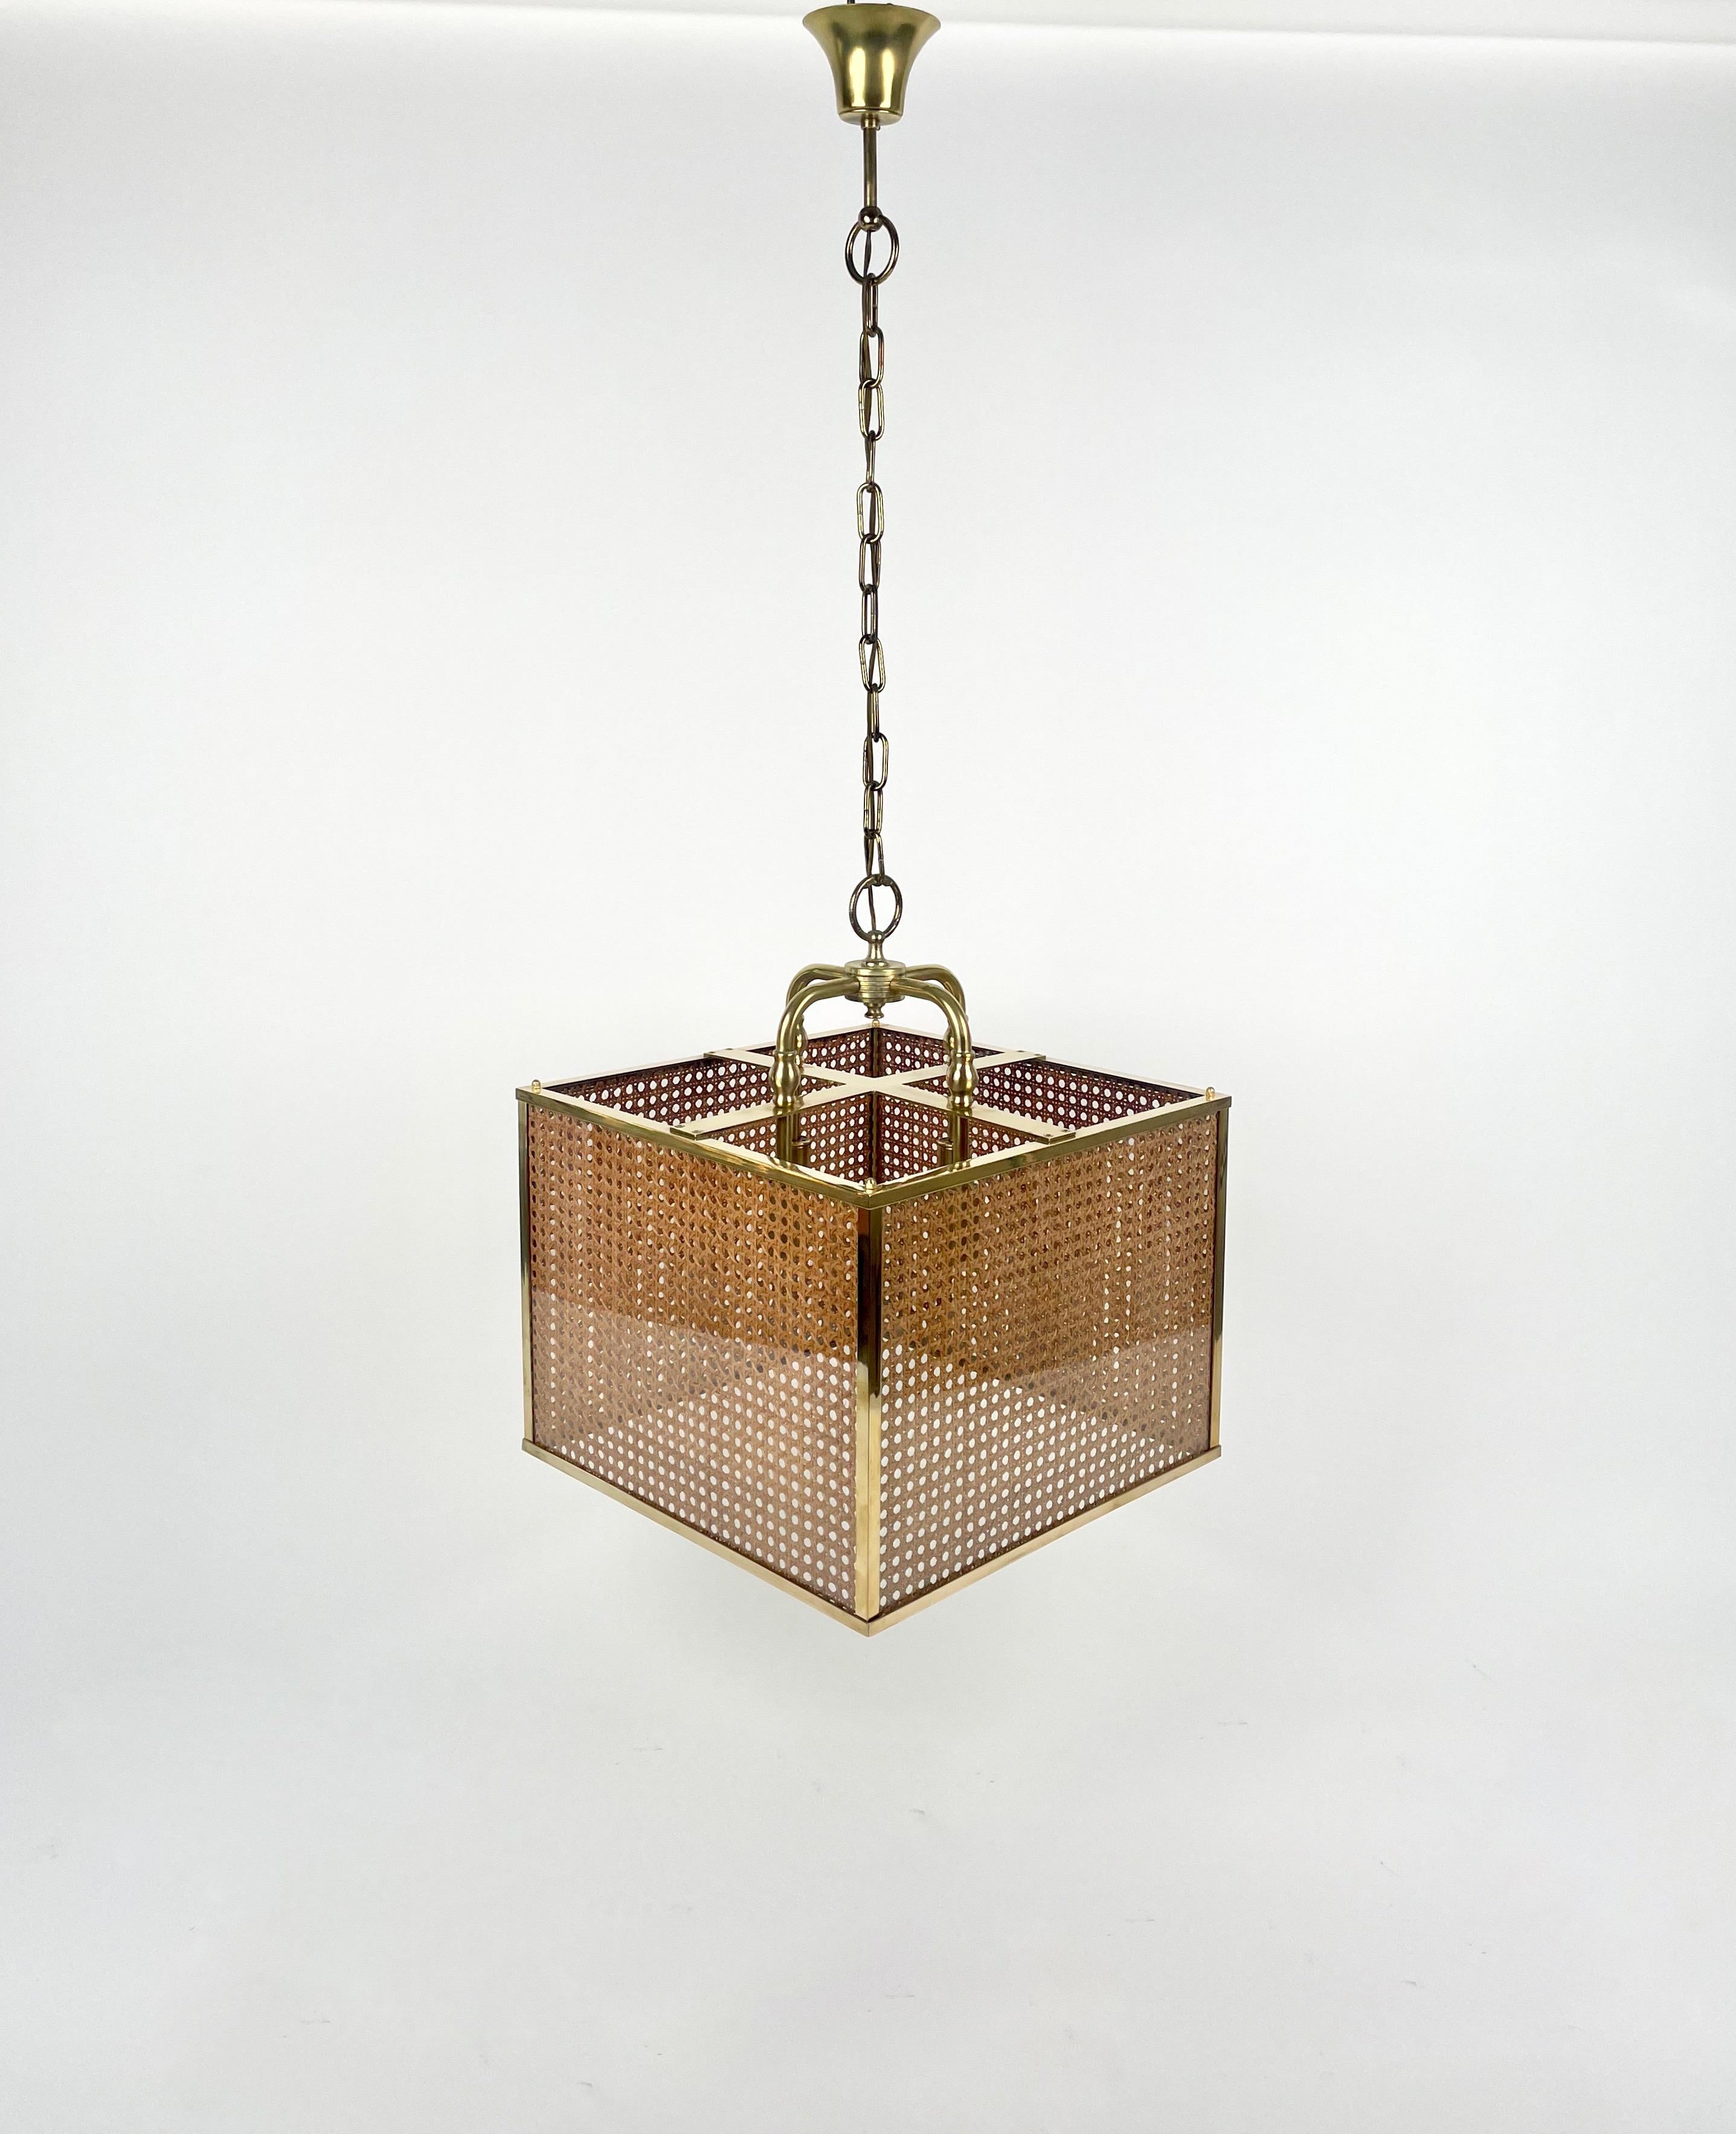 Chandelier pendant four-light made of rattan covered with glass and a brass structure. 

Made in Italy in the 1970s.